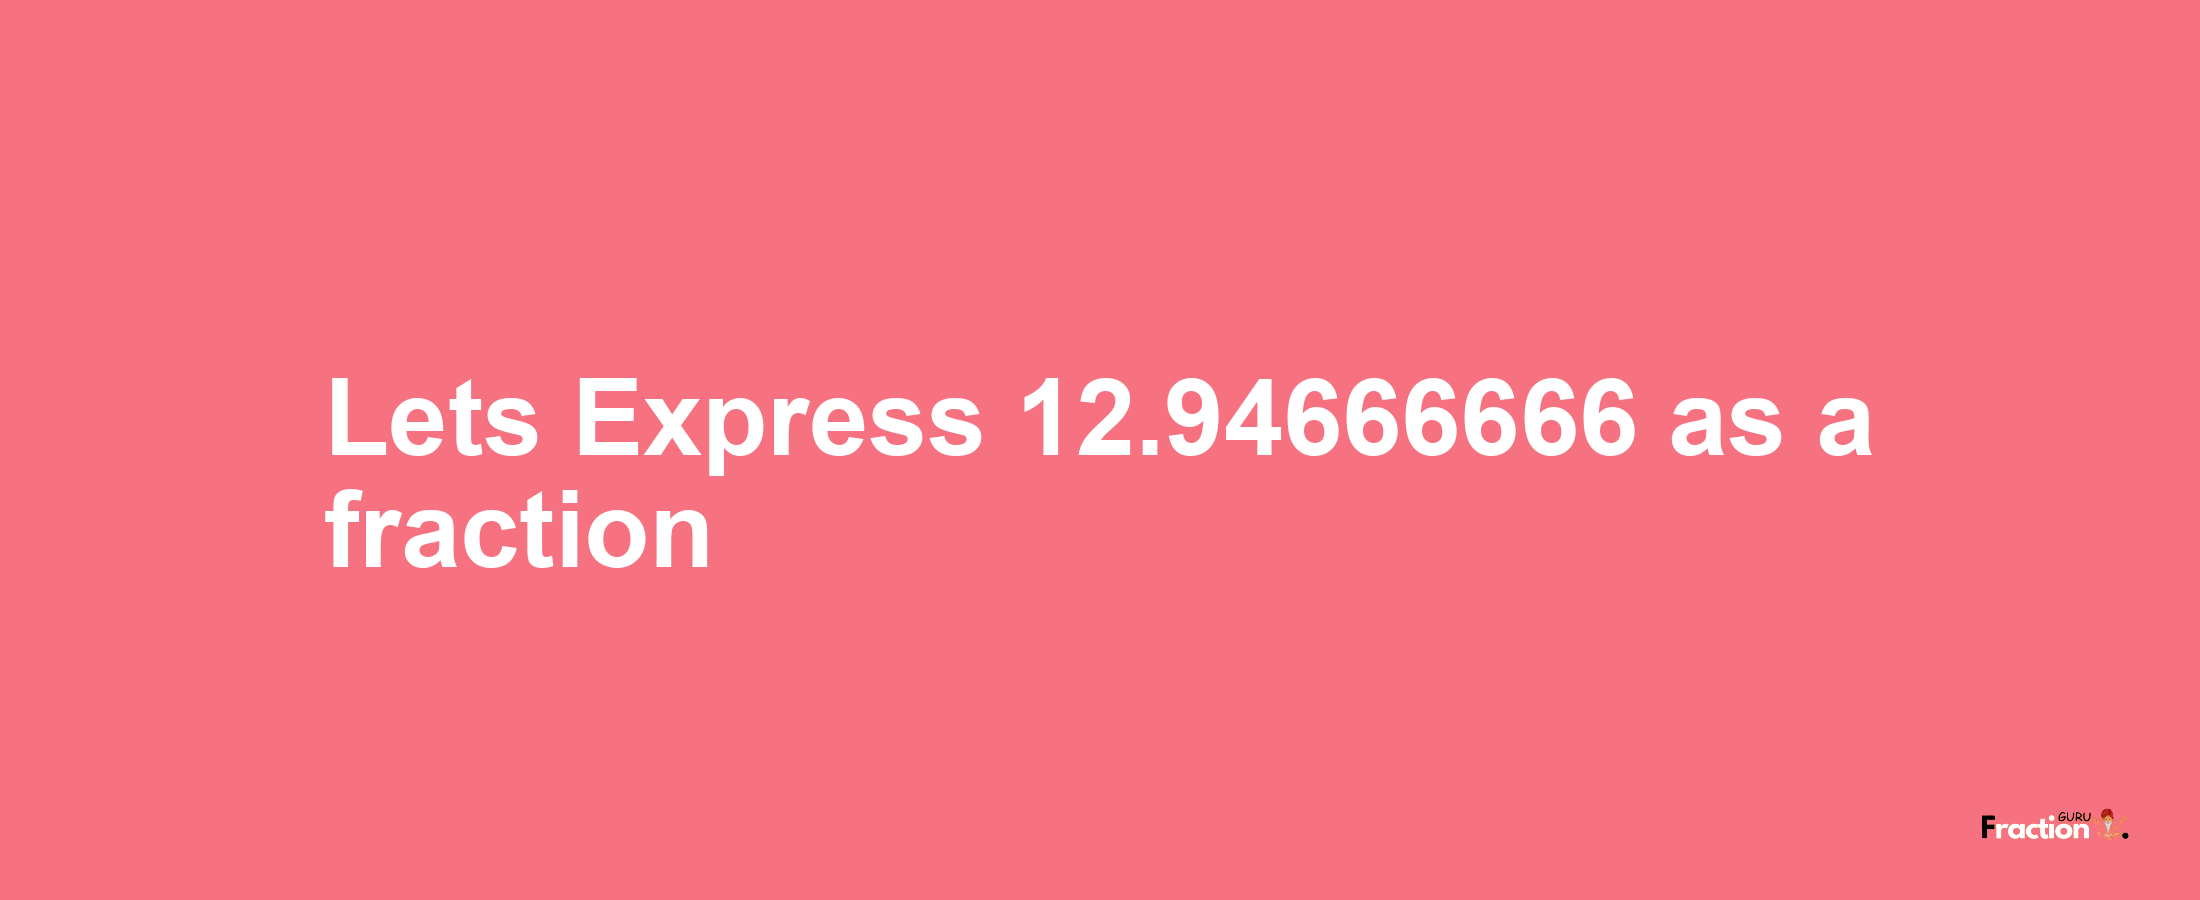 Lets Express 12.94666666 as afraction